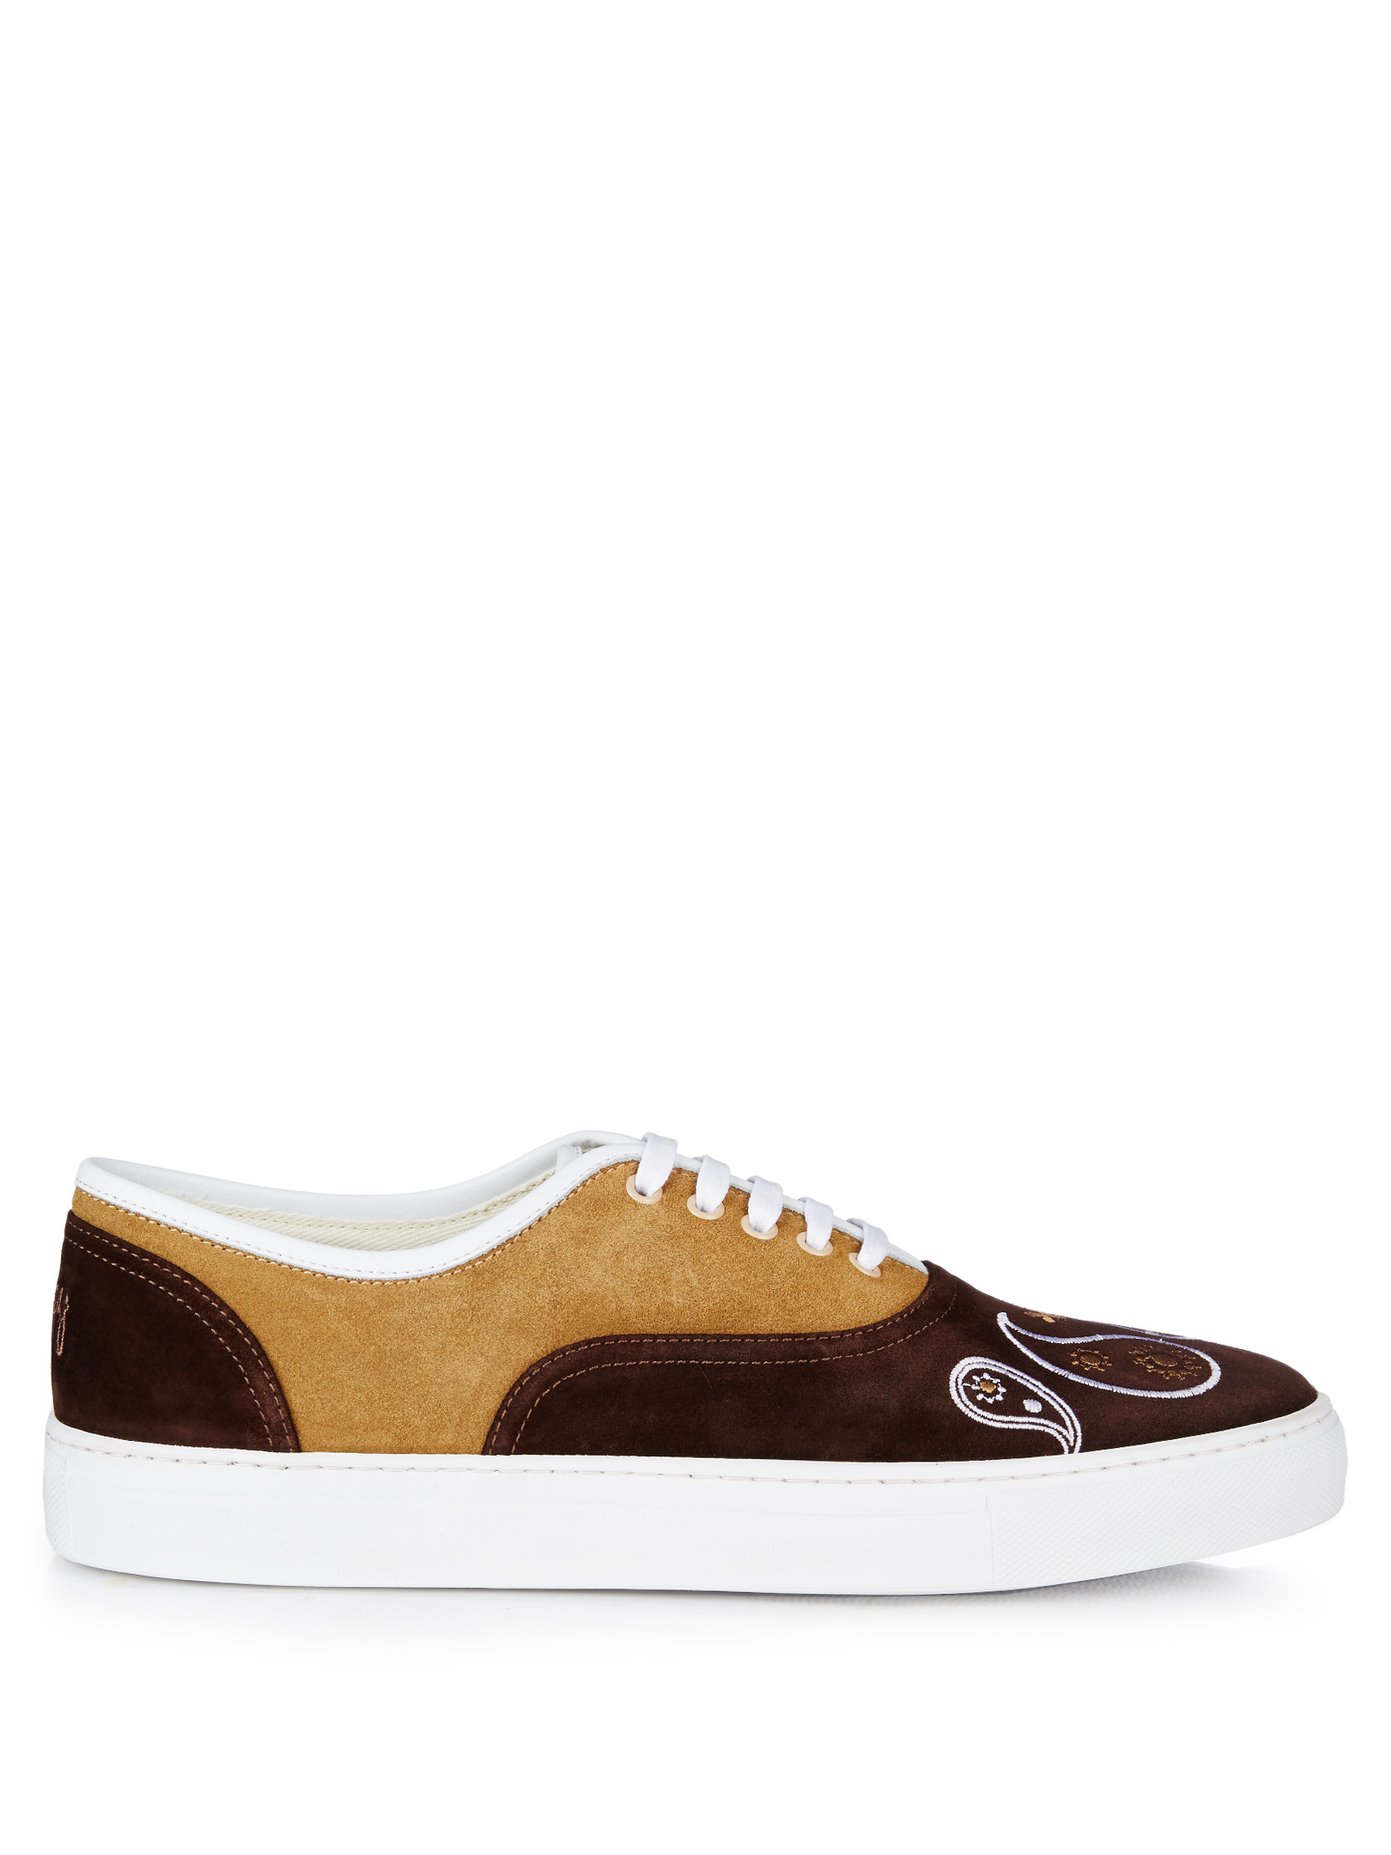 X Greats embroidered low-top suede 